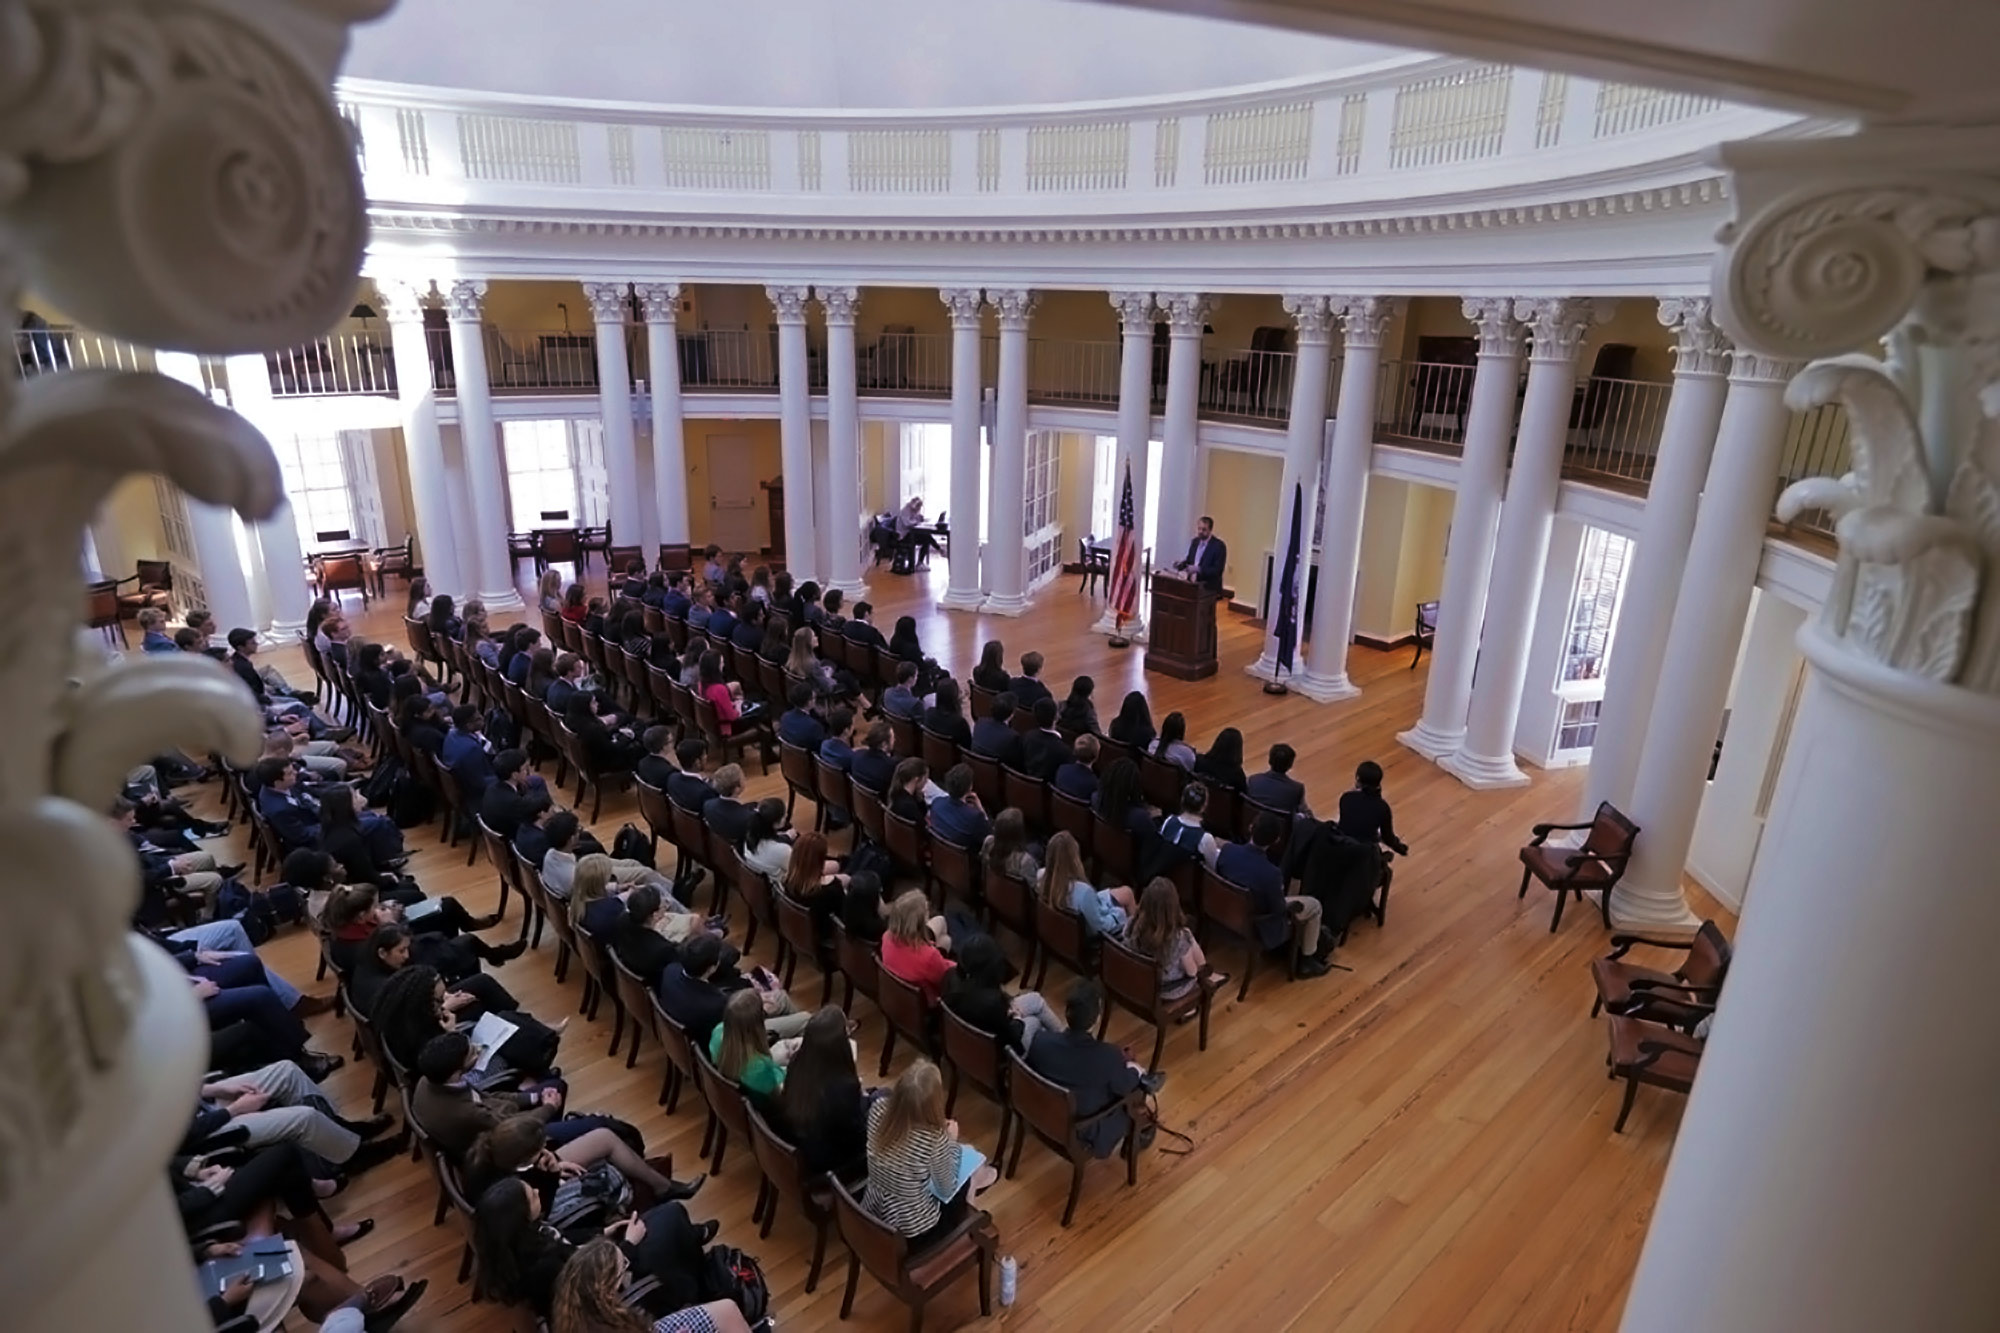 People seating in chairs in the Rotunda's dome room listening to a speaker talking from a podium